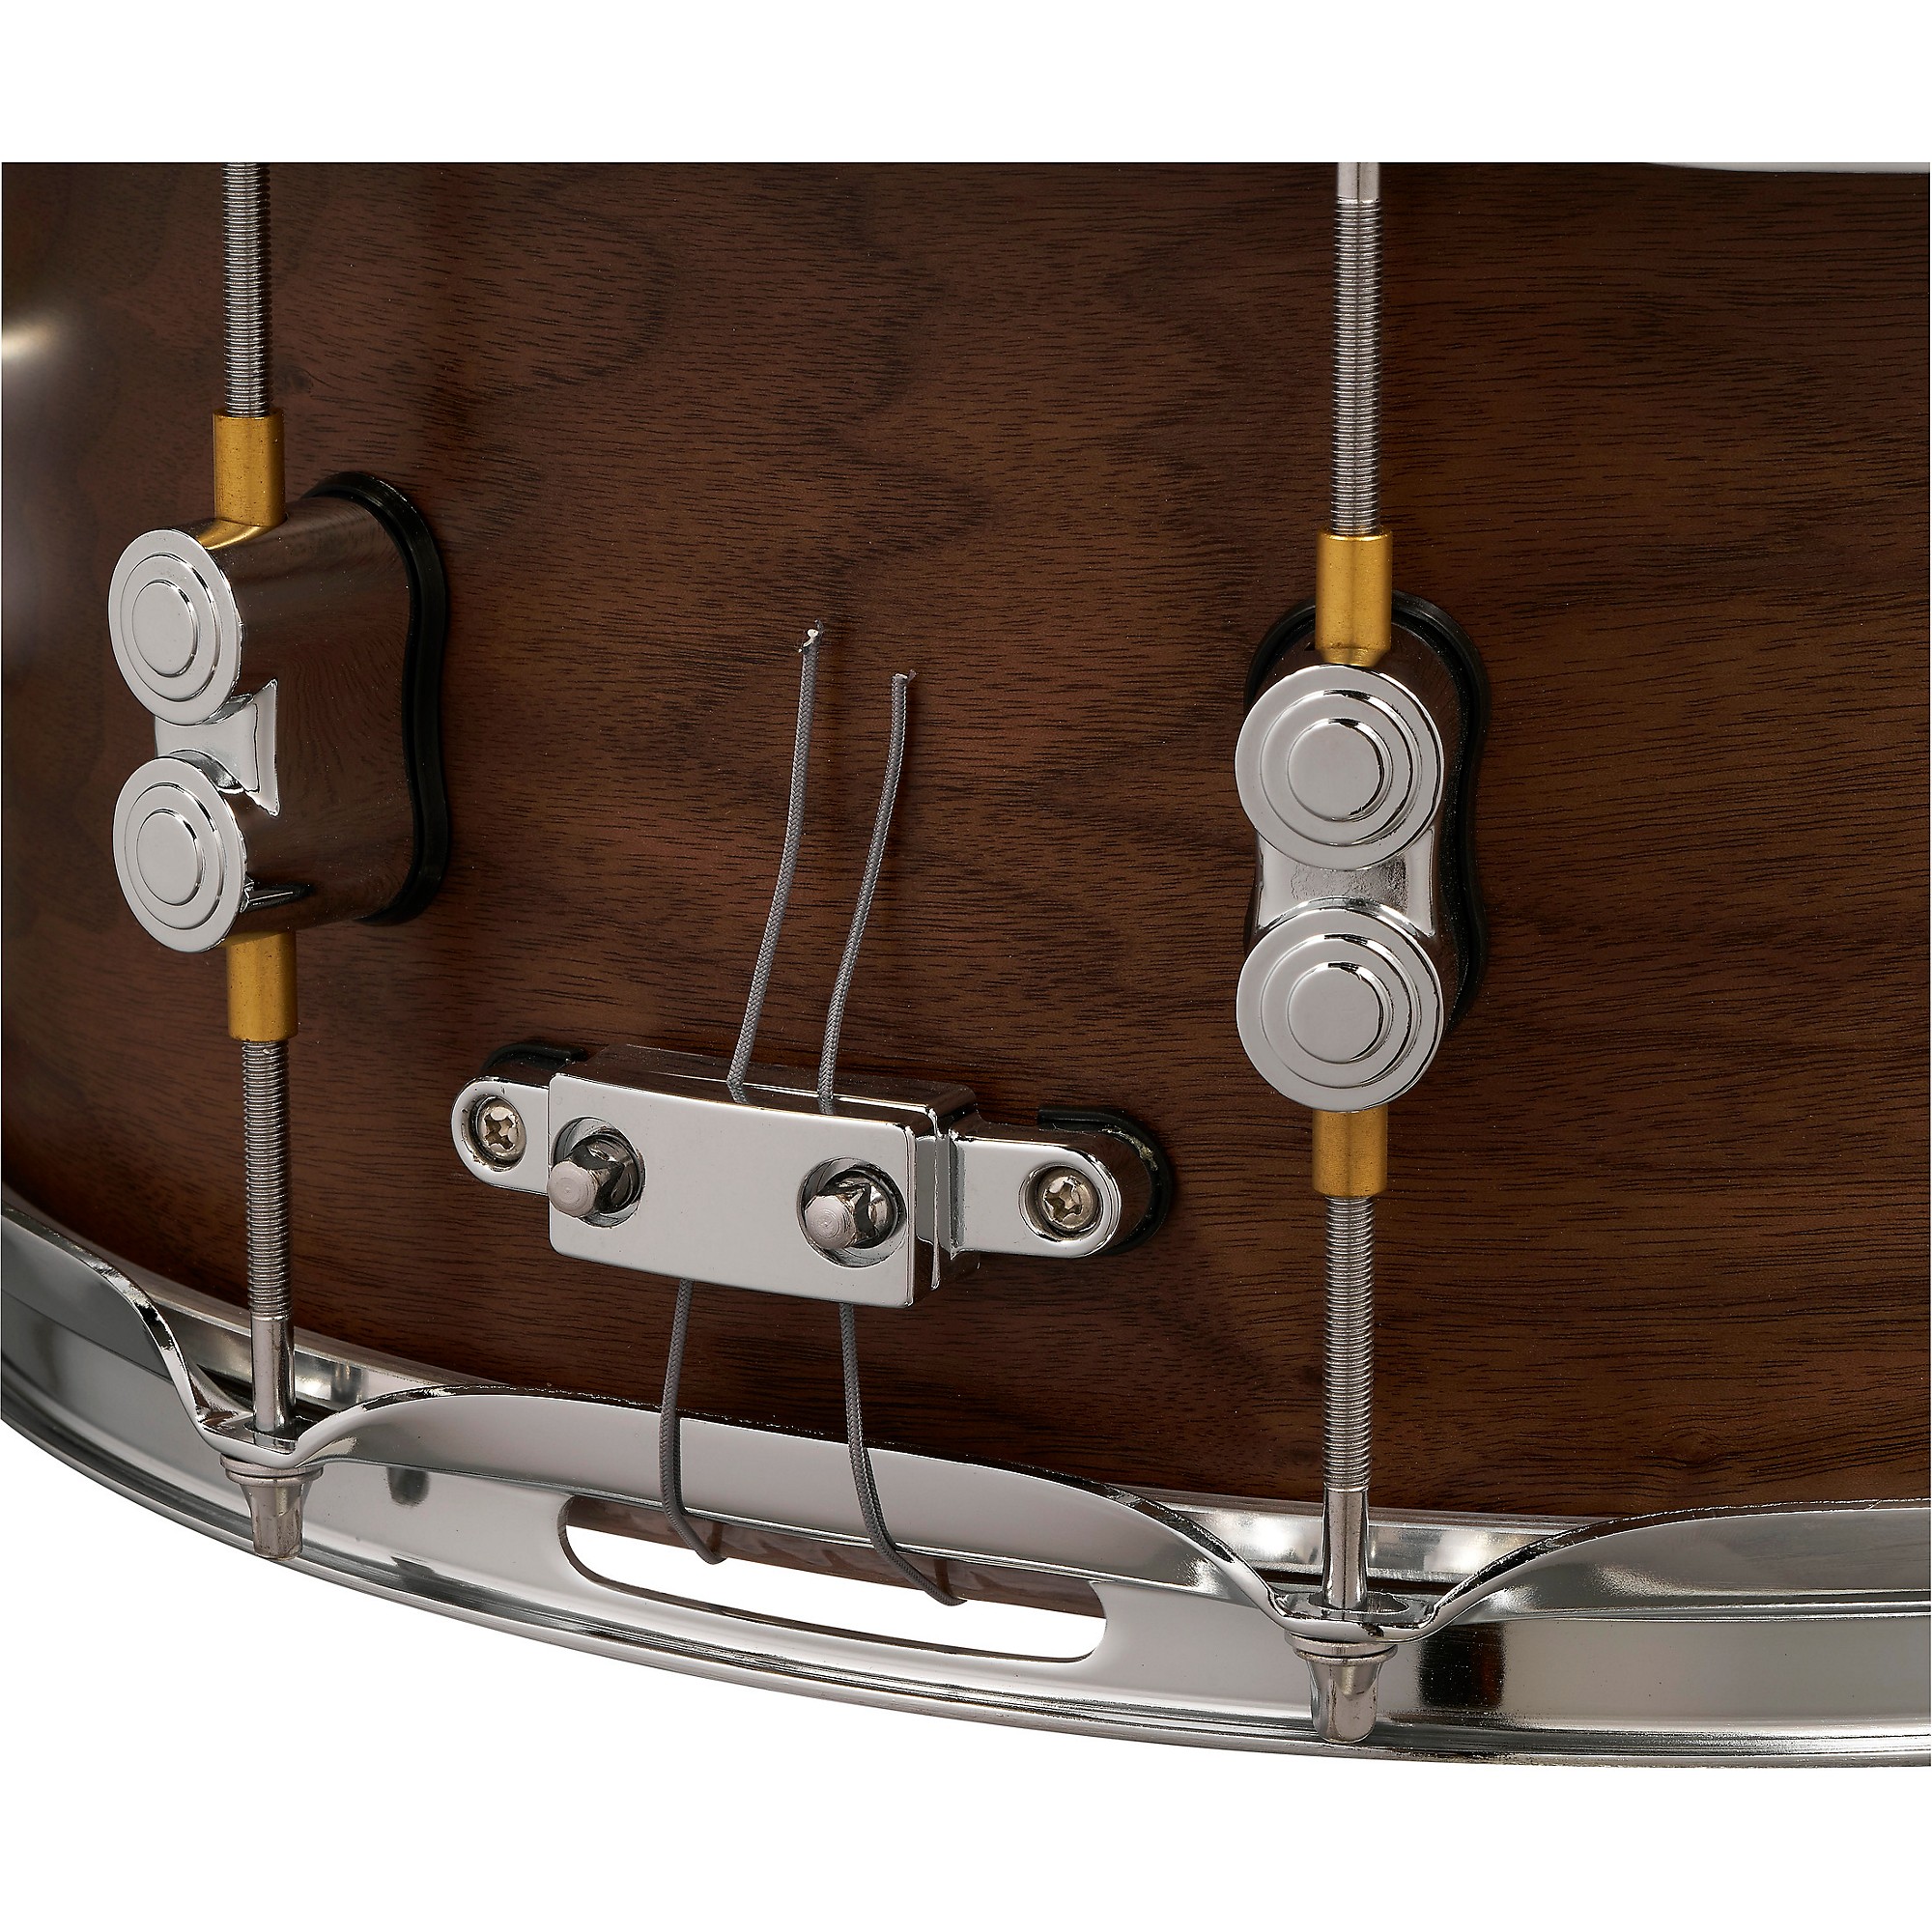 PDP by DW Concept Series Limited Edition 20-Ply Hybrid Walnut